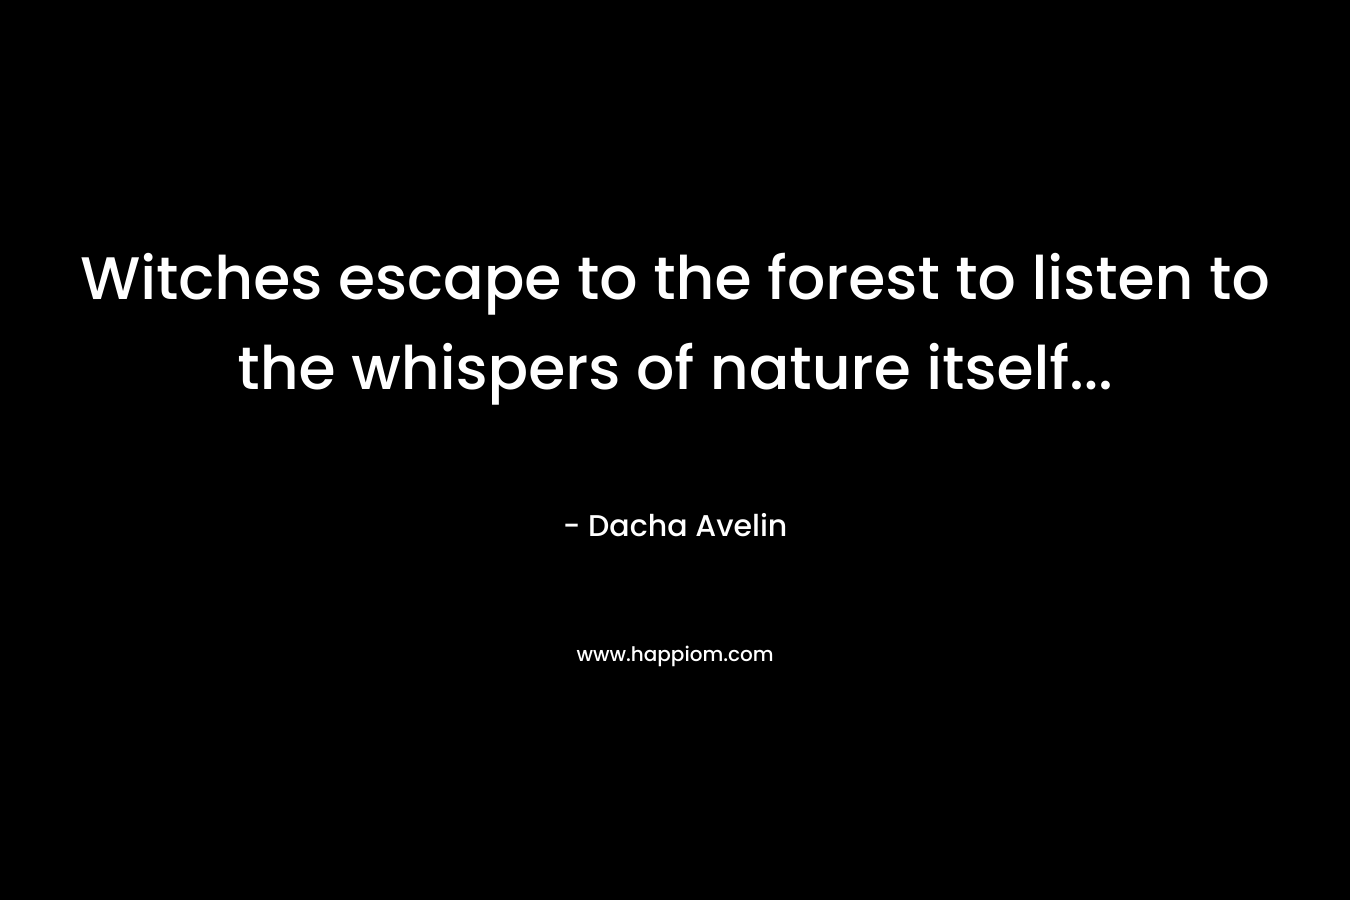 Witches escape to the forest to listen to the whispers of nature itself… – Dacha Avelin